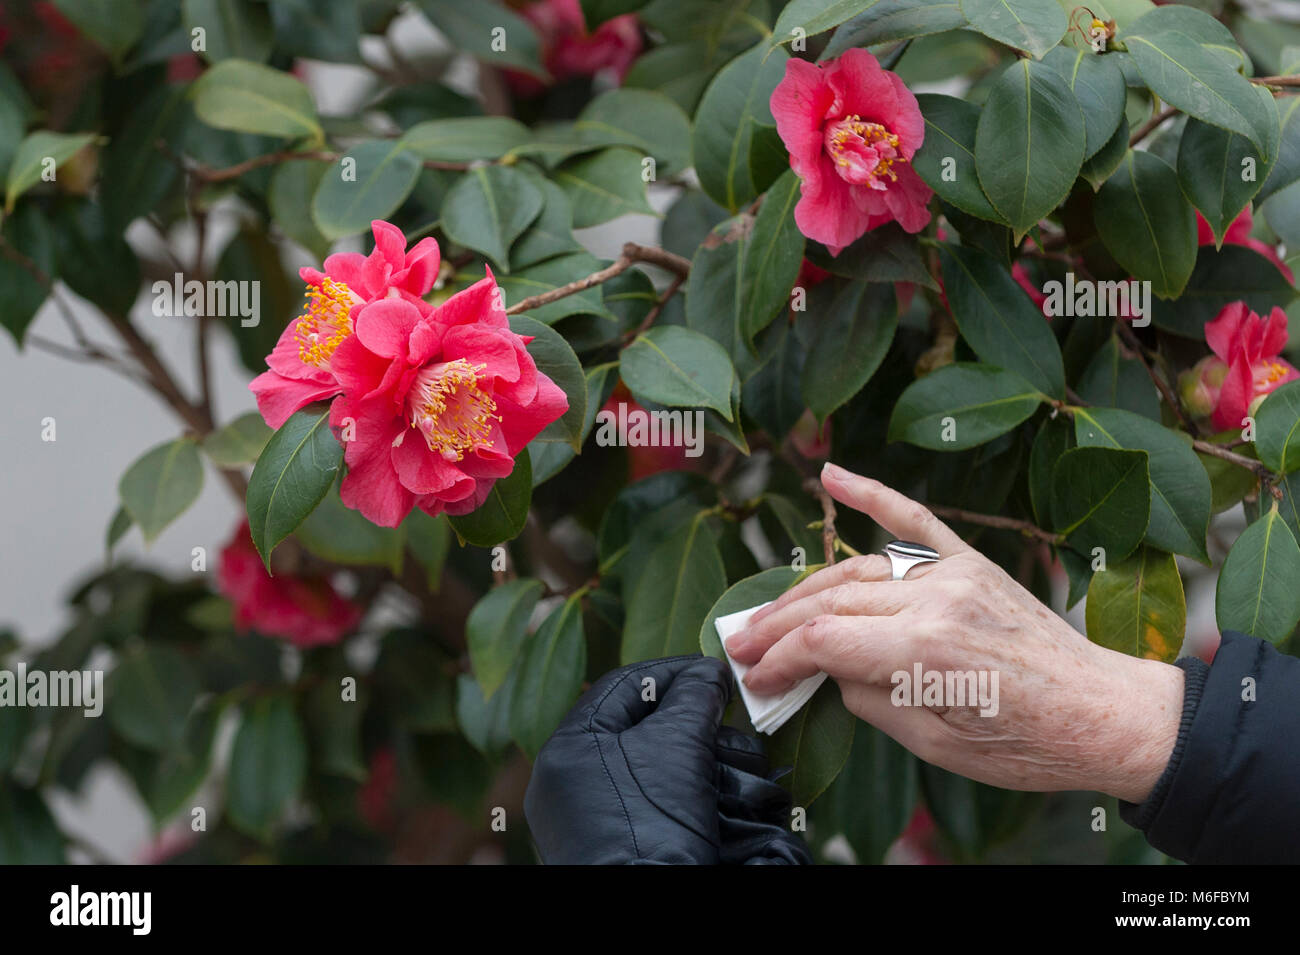 London, UK.  3 March 2018.  A staff member dusts the leaves of camellias on display at the annual Camellia Show taking place at Chiswick House and Gardens in west London.  Open until 25 March, the collection in the Grade1 listed Conservatory houses 33 rare and historic varieties of camellia japonica, including the unique Middlemist's Red, brought over to the UK in 1804, and one of only two known to exist (the other is in New Zealand).  Credit: Stephen Chung / Alamy Live News Stock Photo